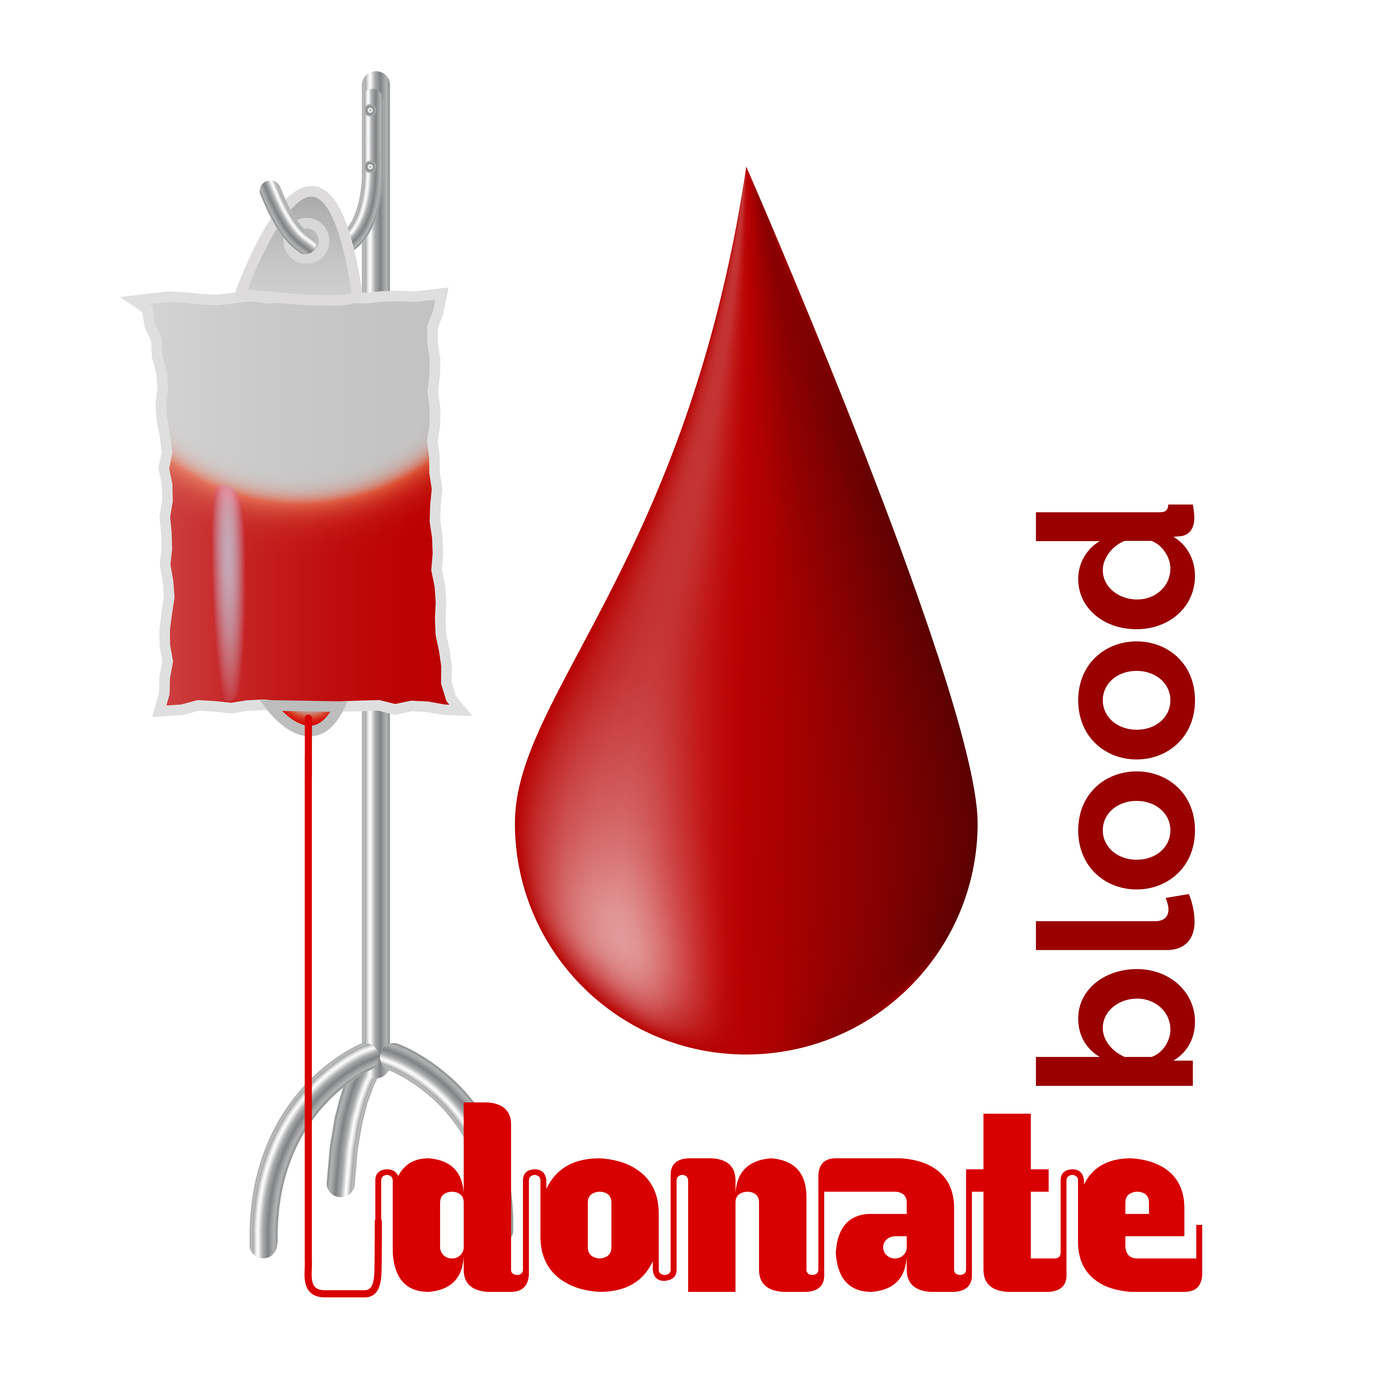 January Is National Blood Donor Month!